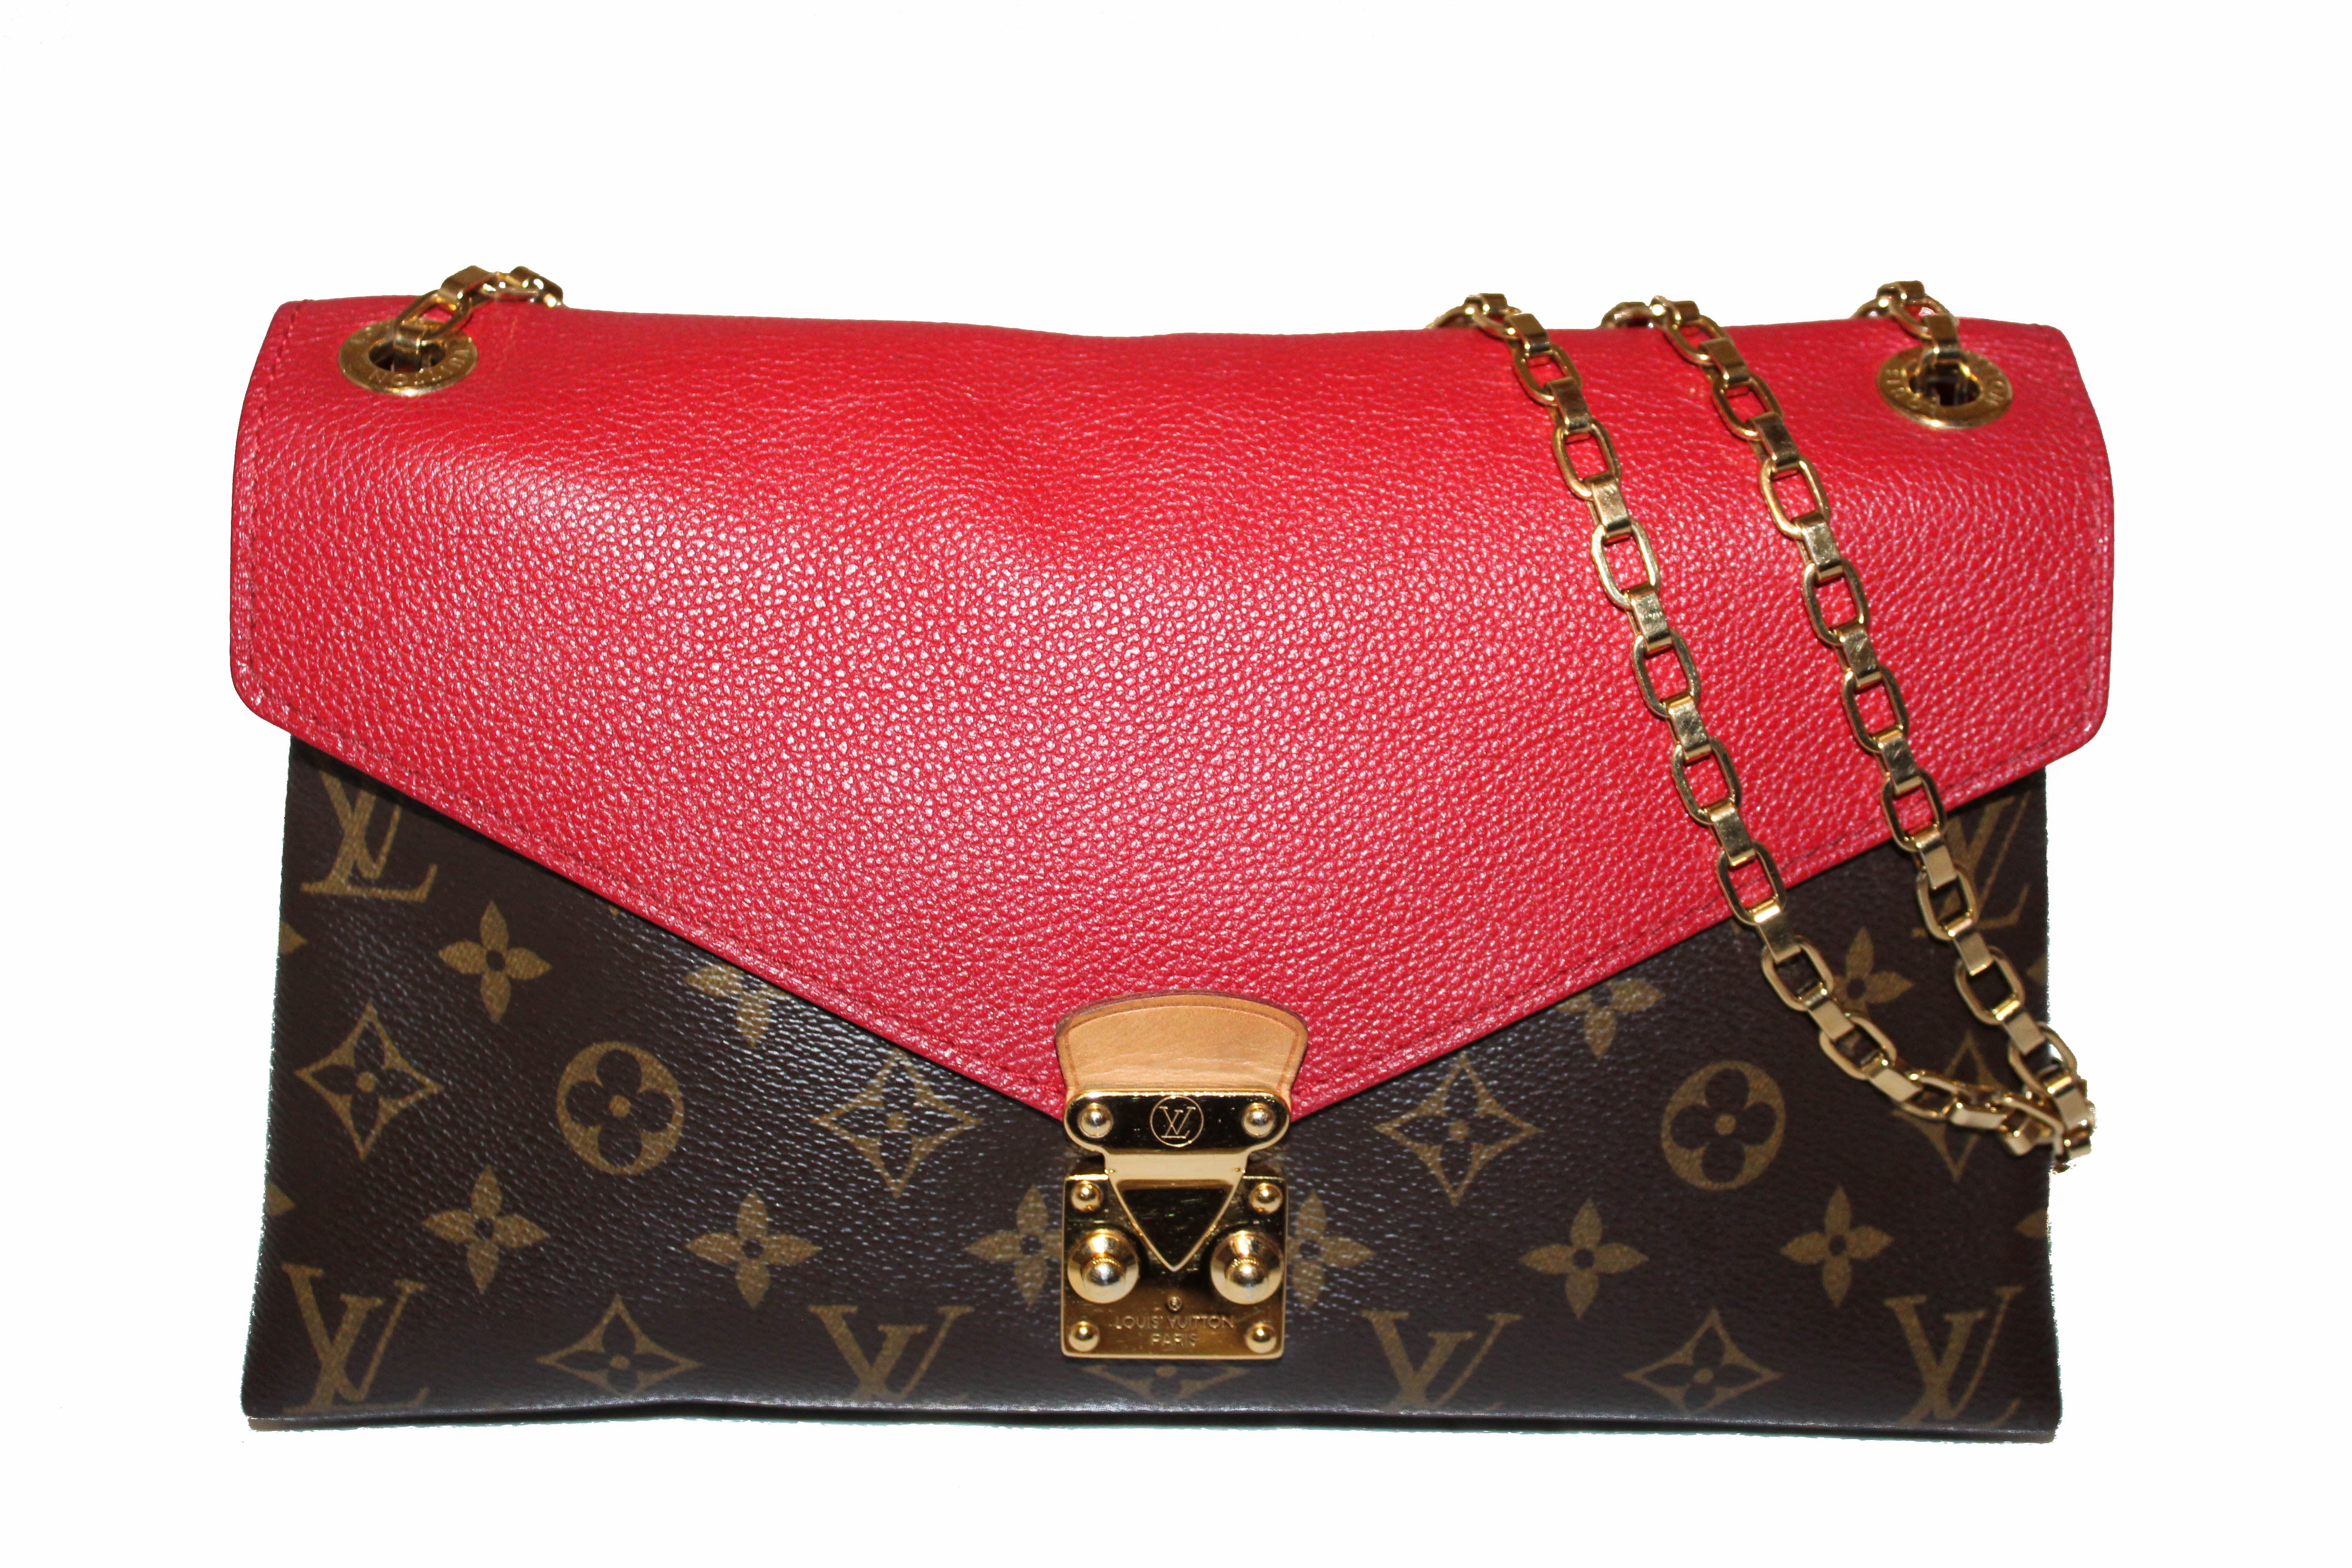 What Is An Authentic Louis Vuitton Bag | IQS Executive